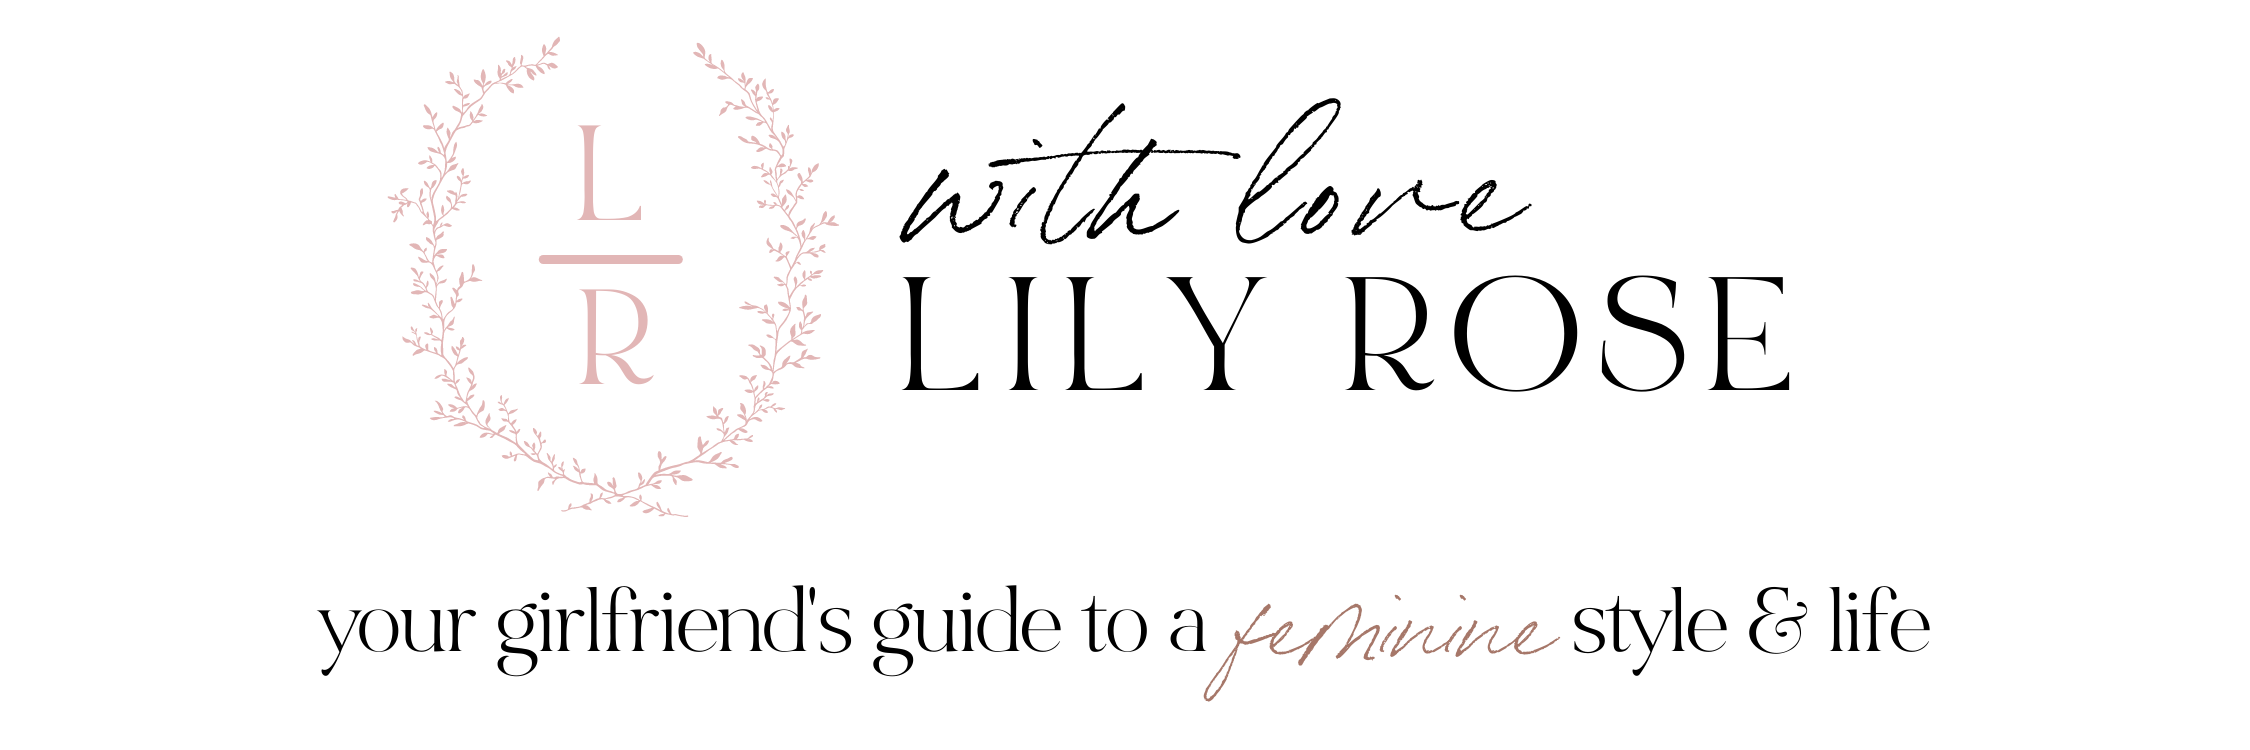 Lily Rose  style blogger (@withlovelilyrose) • Instagram photos